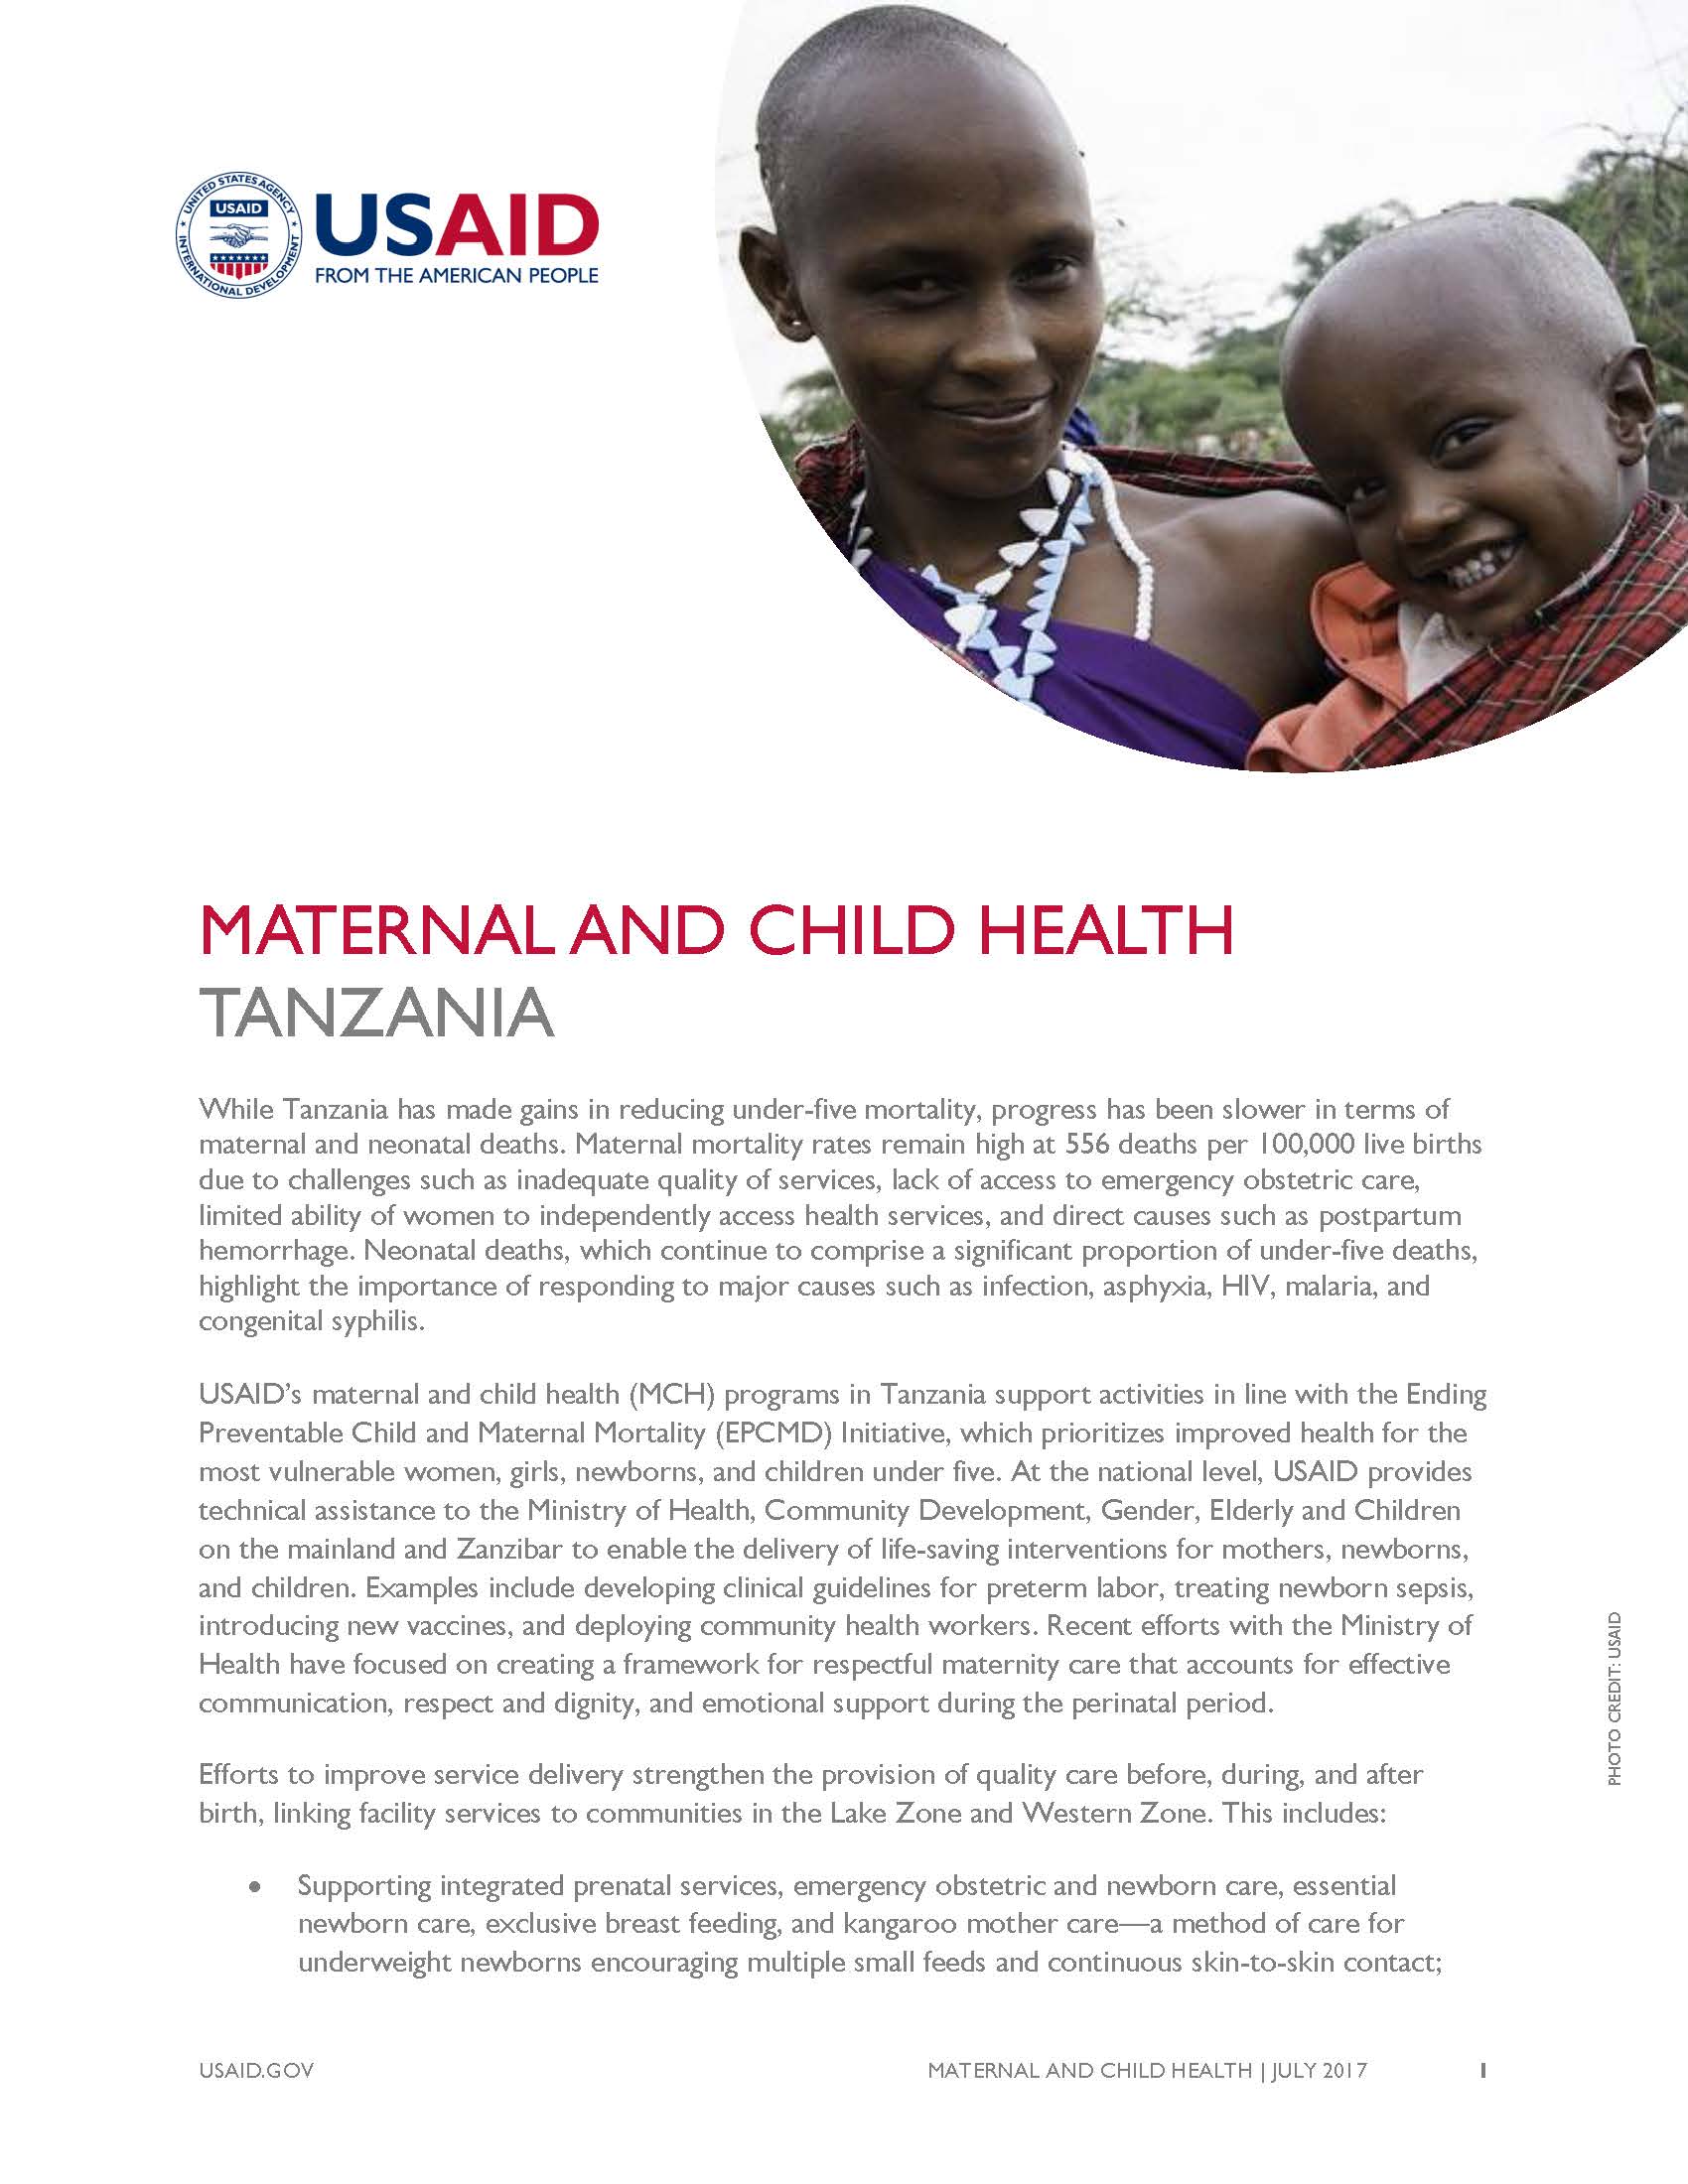 Maternal and Child Health Fact Sheet